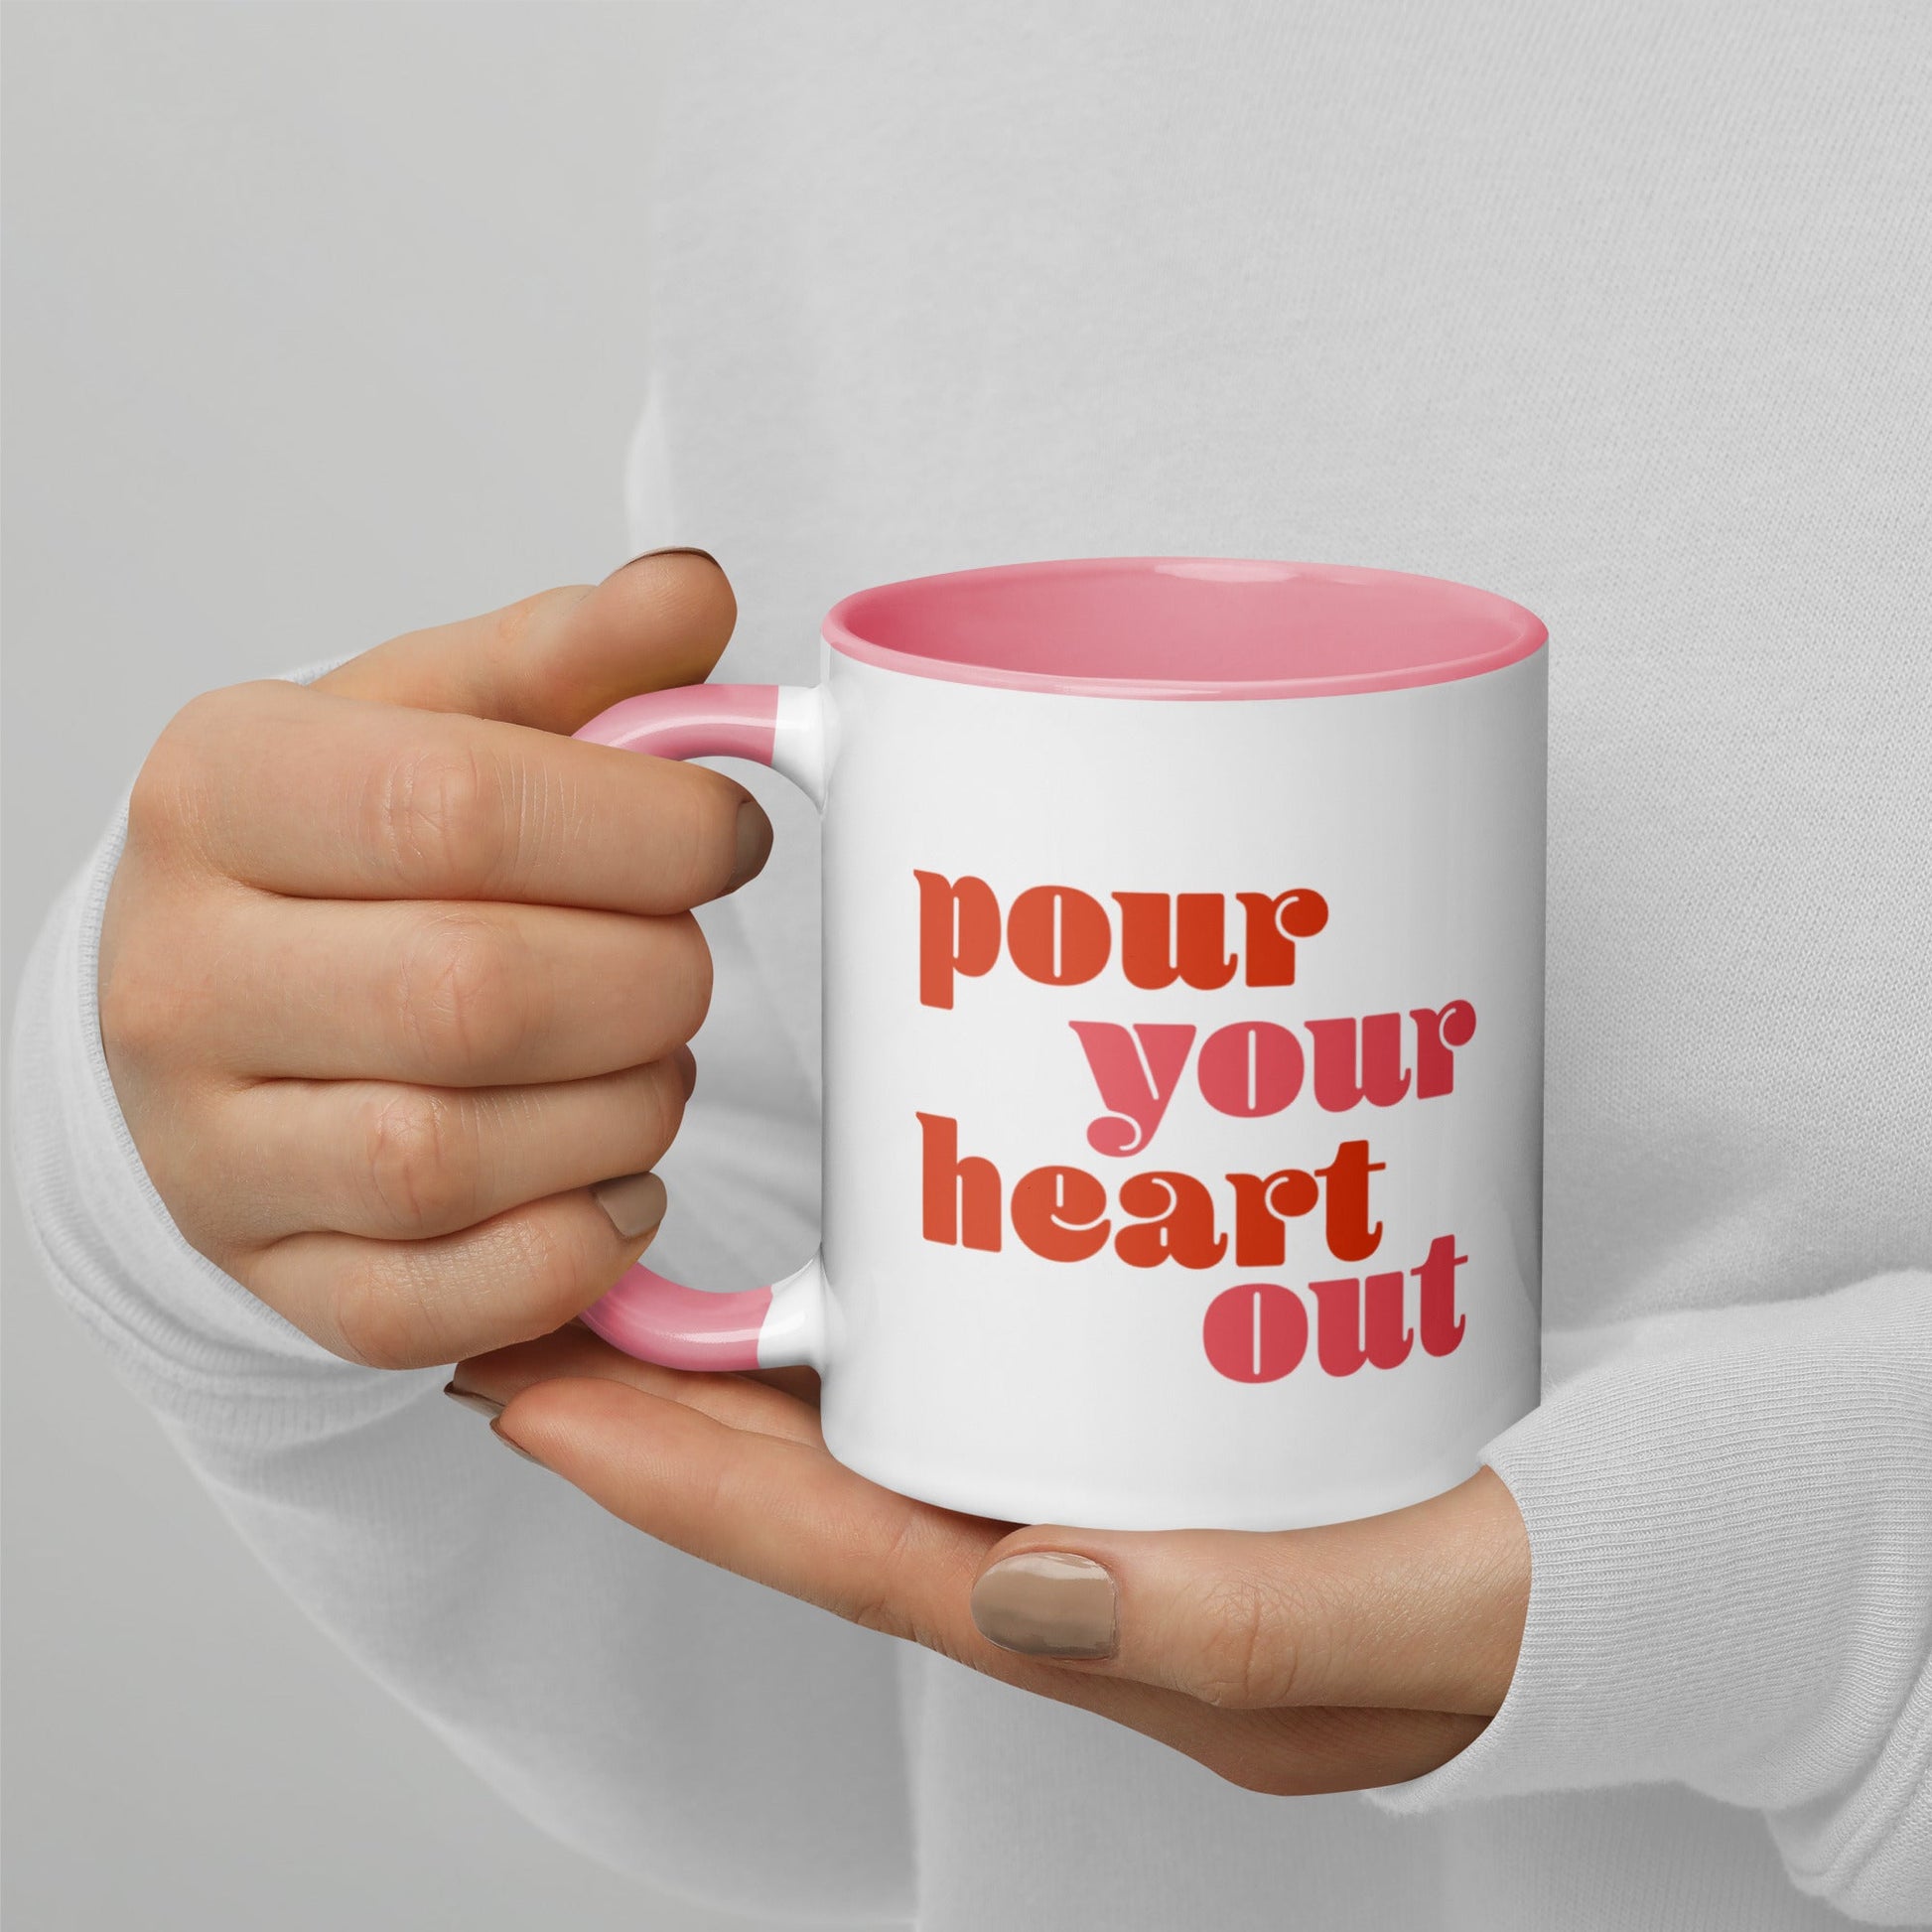 Pour Your Heart Out Mug by Posse Paper Goods